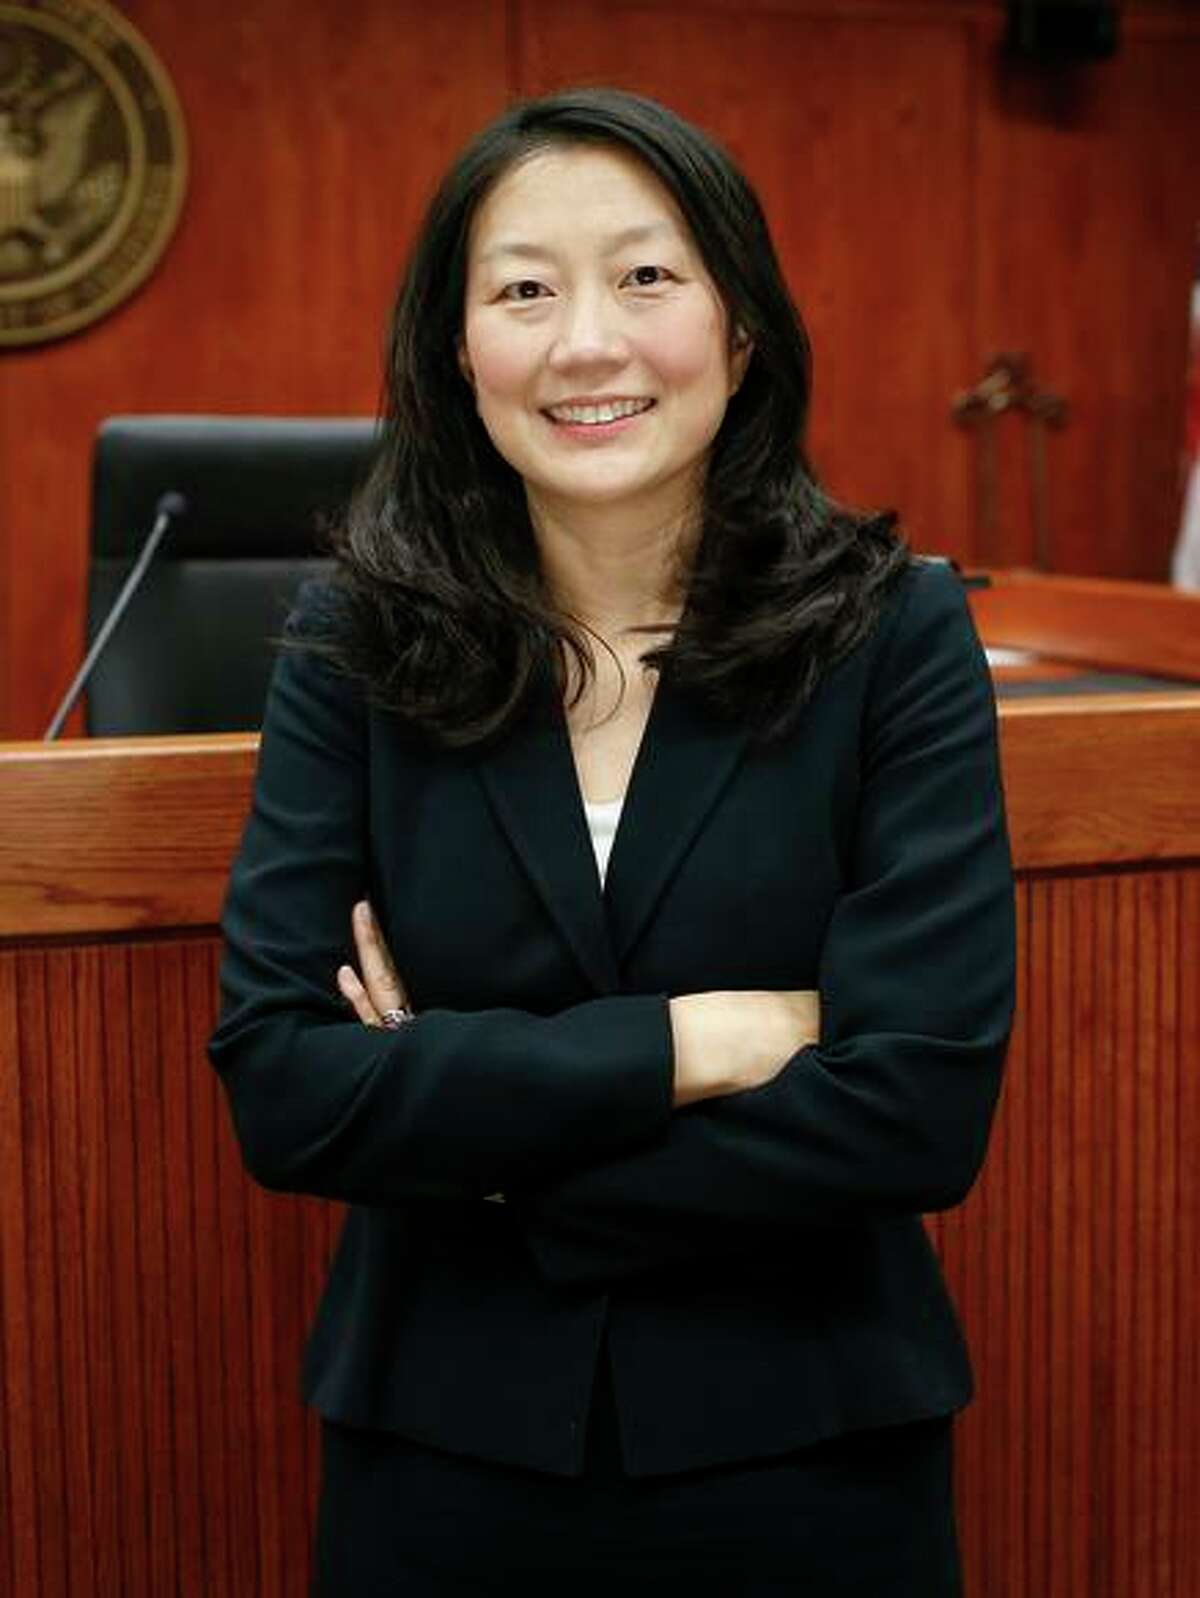 United States District Court Judge Lucy Koh has ruled the 2020 census count must continue.